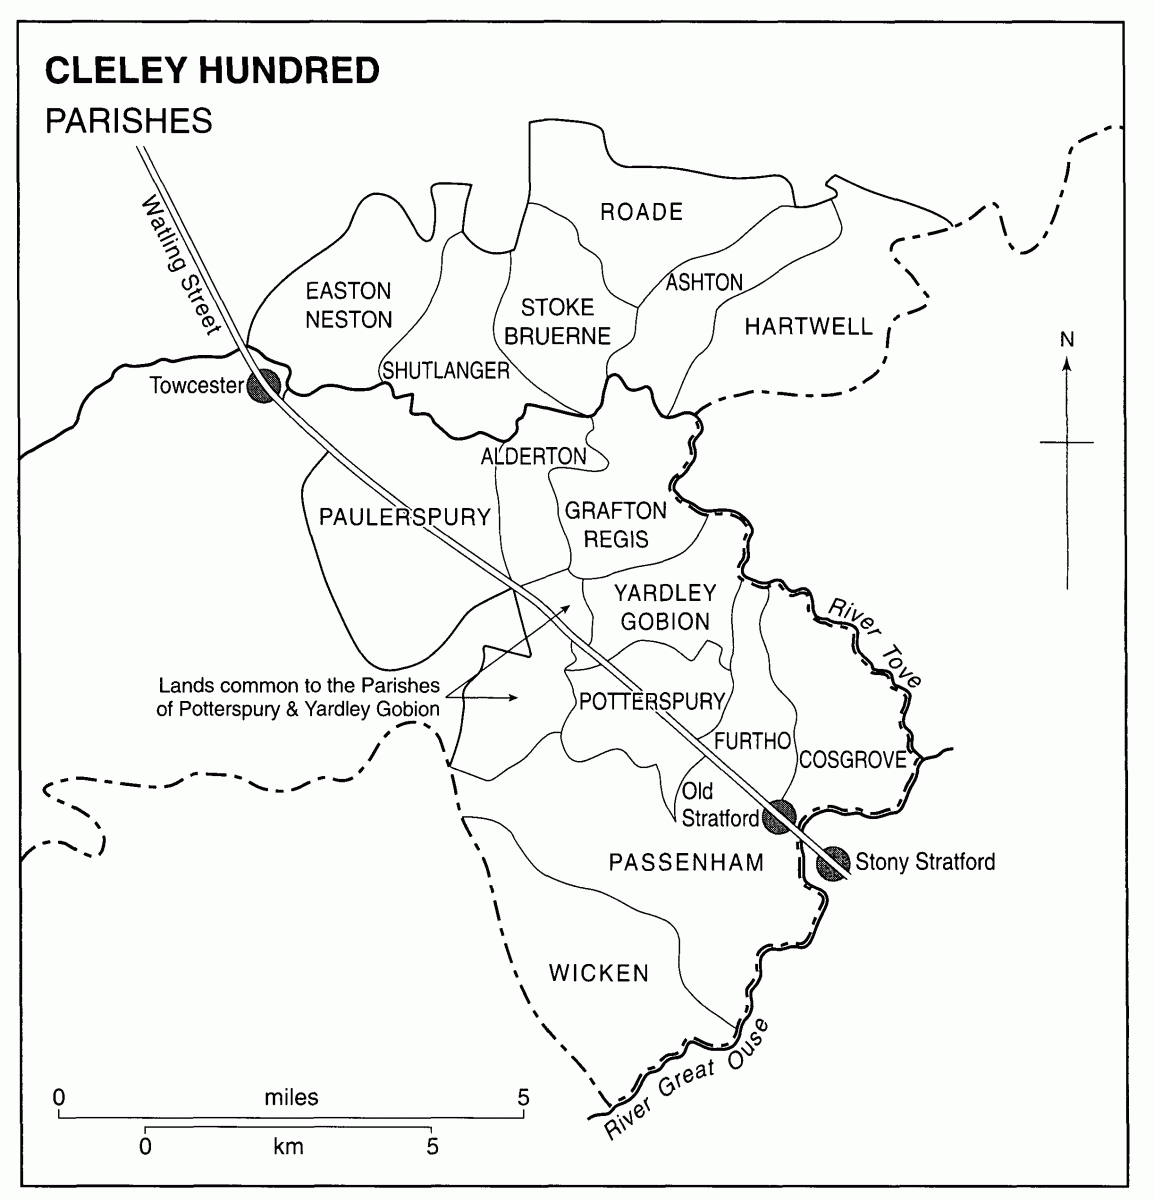 Map of Cleley Hundred